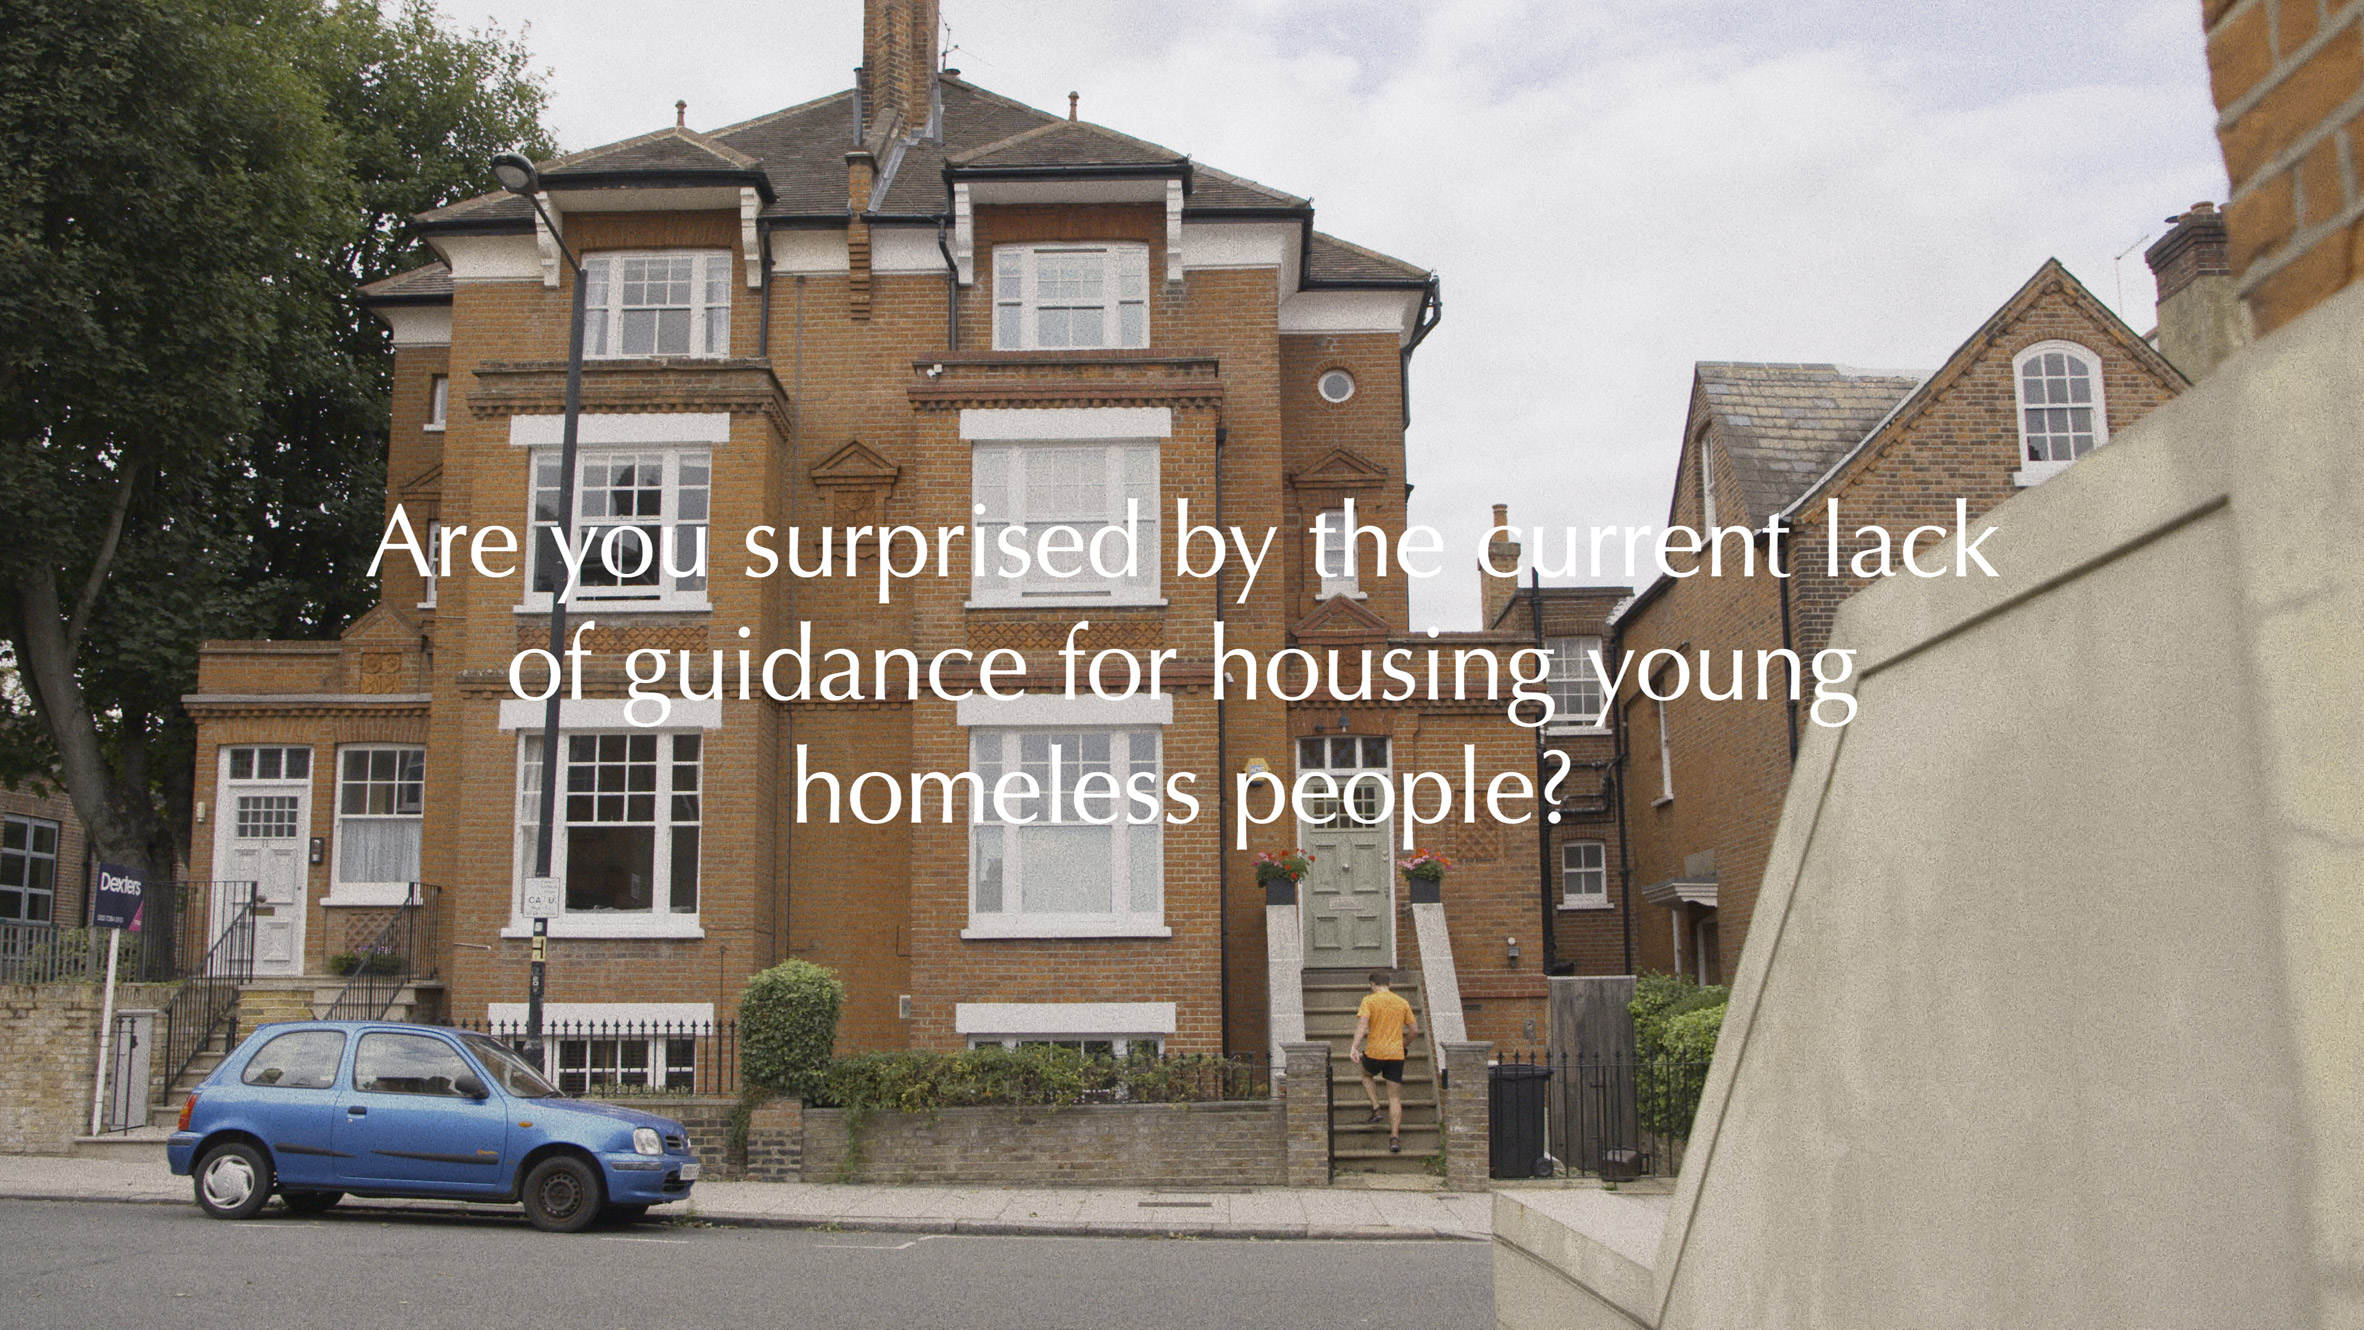 Homeless guidance for young people